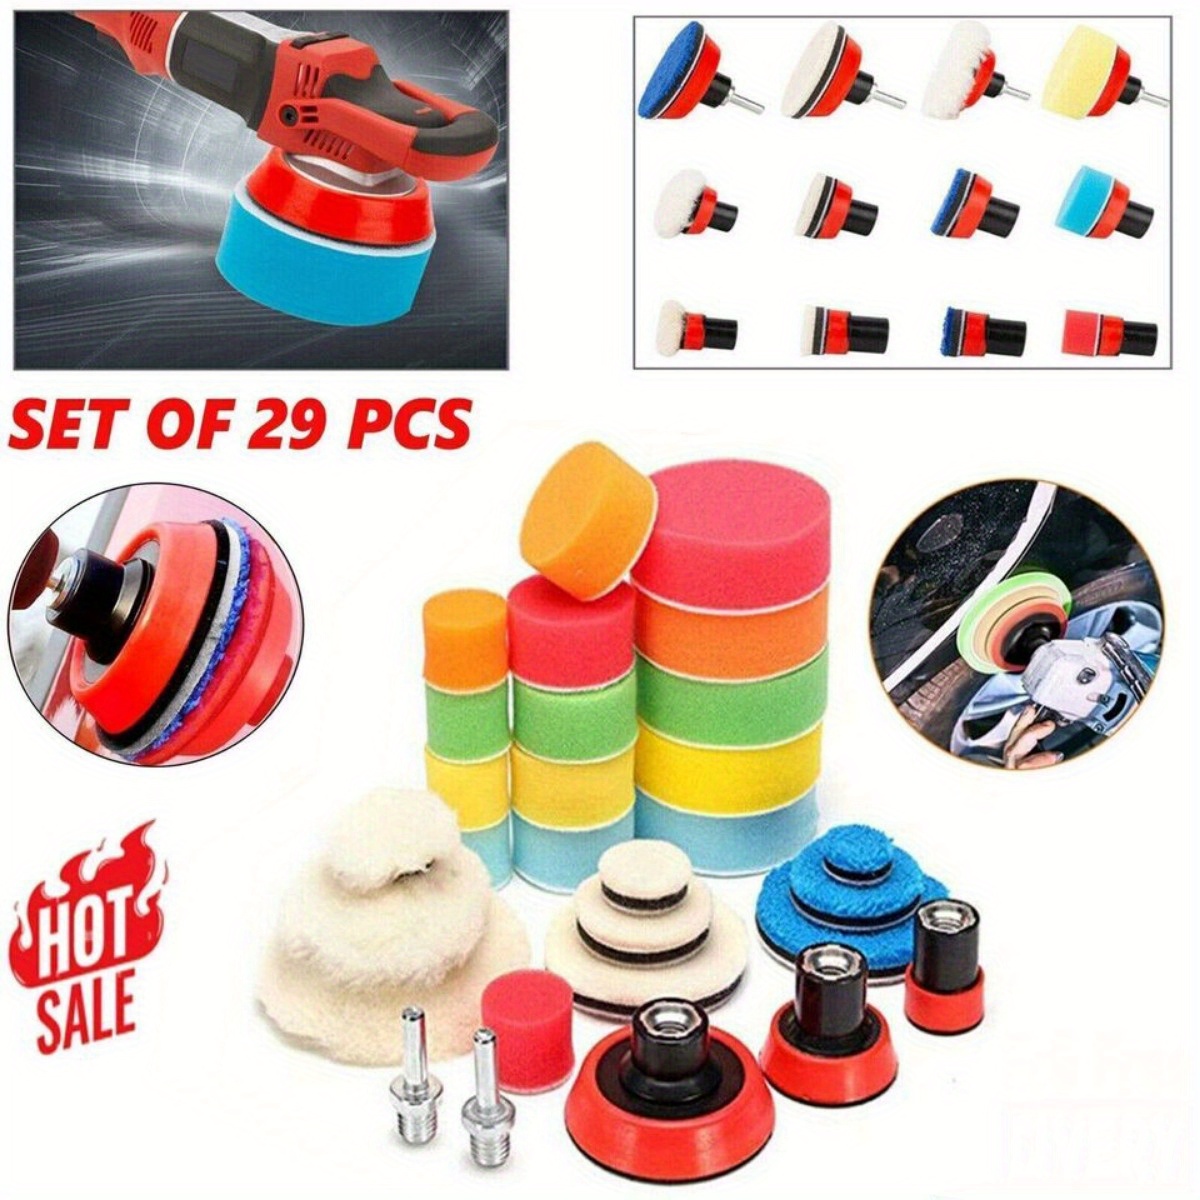 

29pcs Buffing Pad, Polishing Accessories For Car Washing, Wheel Buffer Polisher Kit, Drill Cleaning Attachment